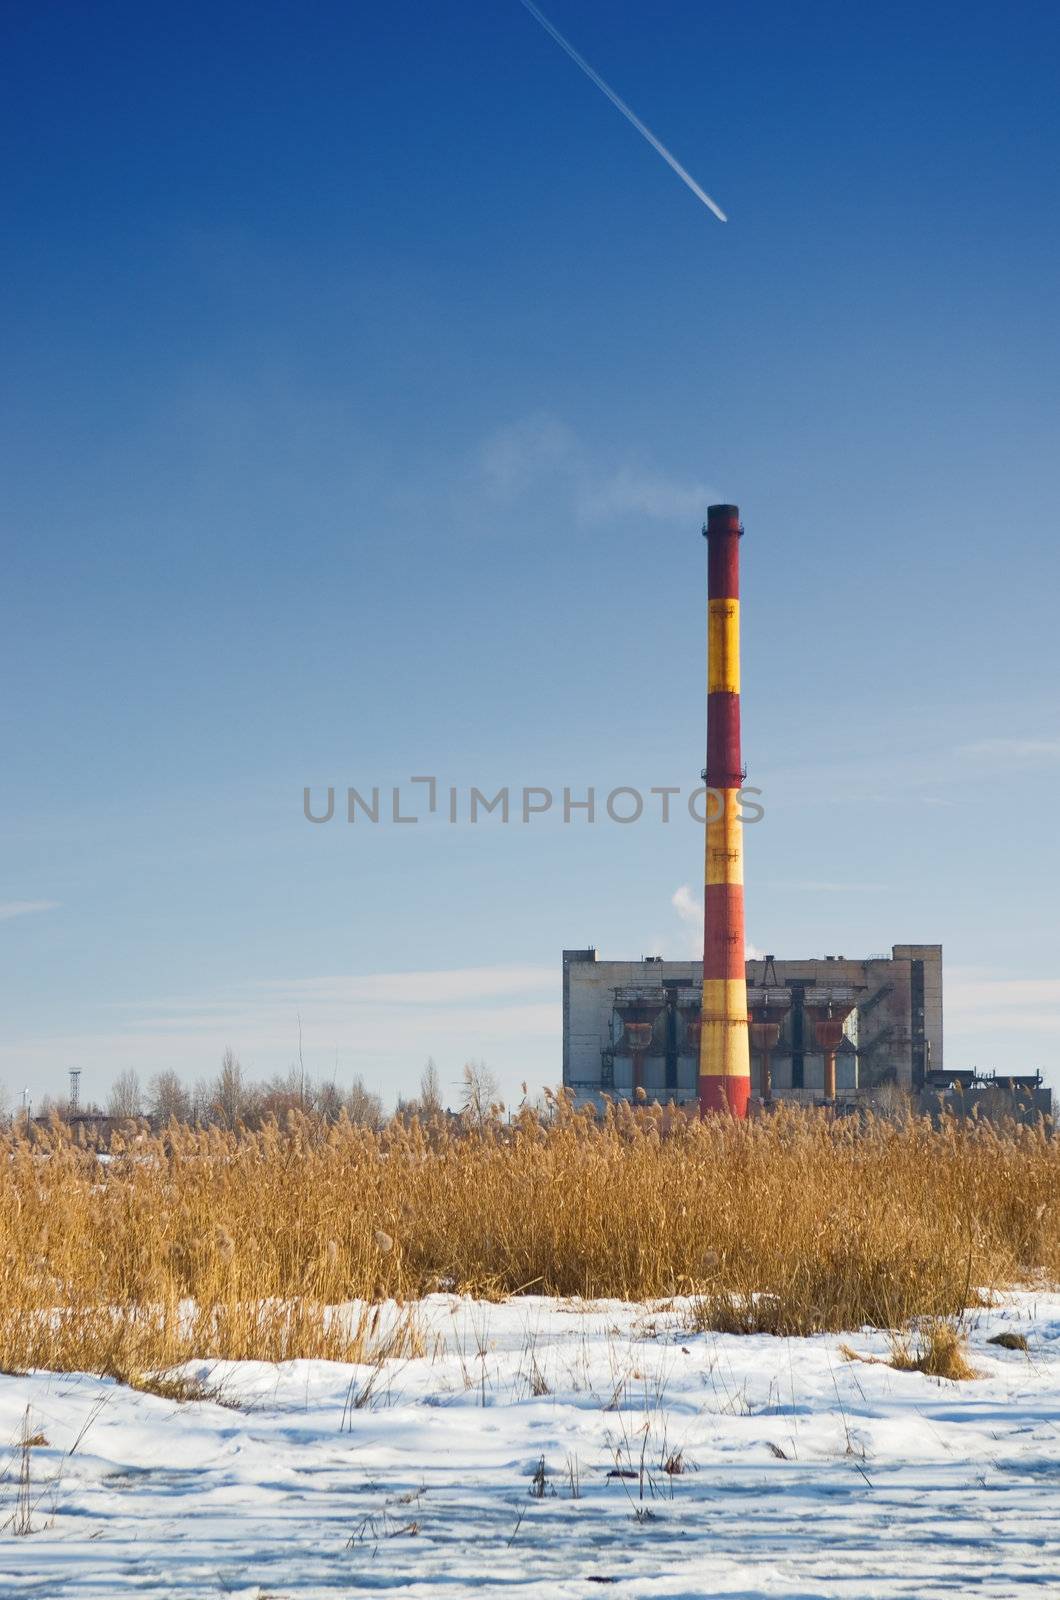 The old municipal waste incineration plant